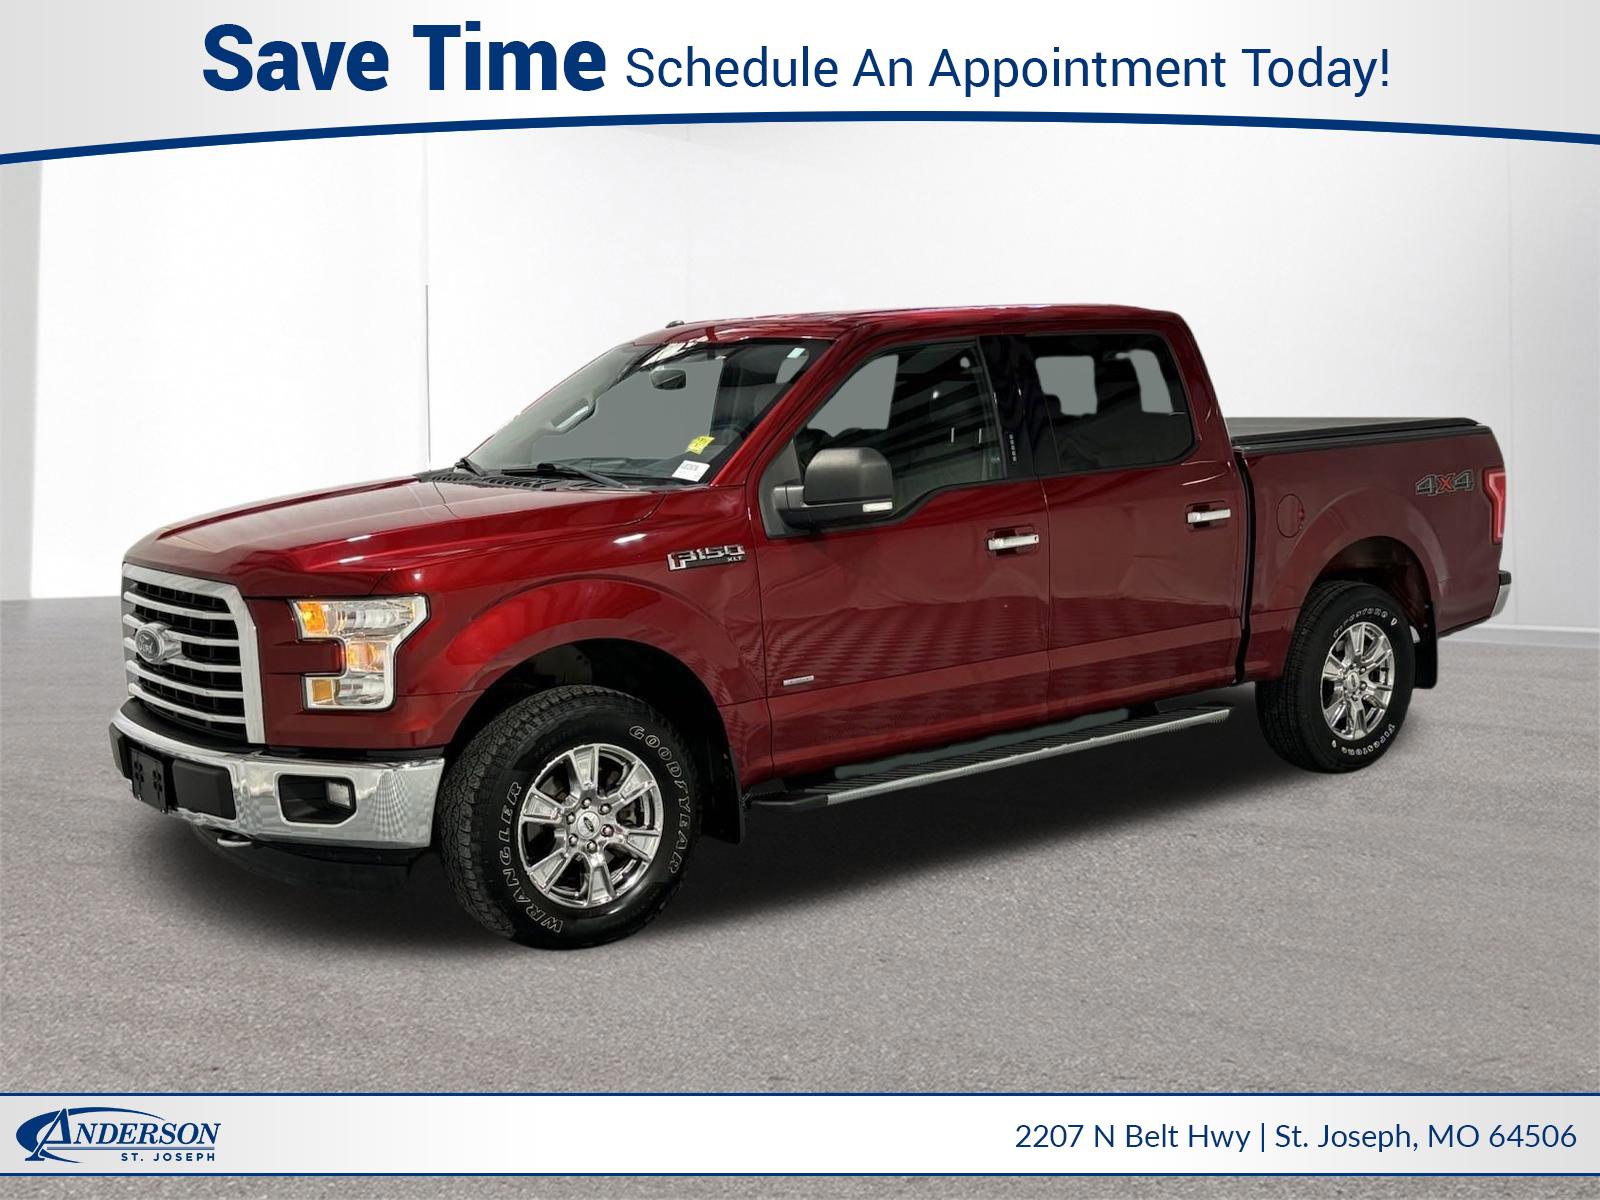 Used 2016 Ford F-150 XLT Stock: 3002070